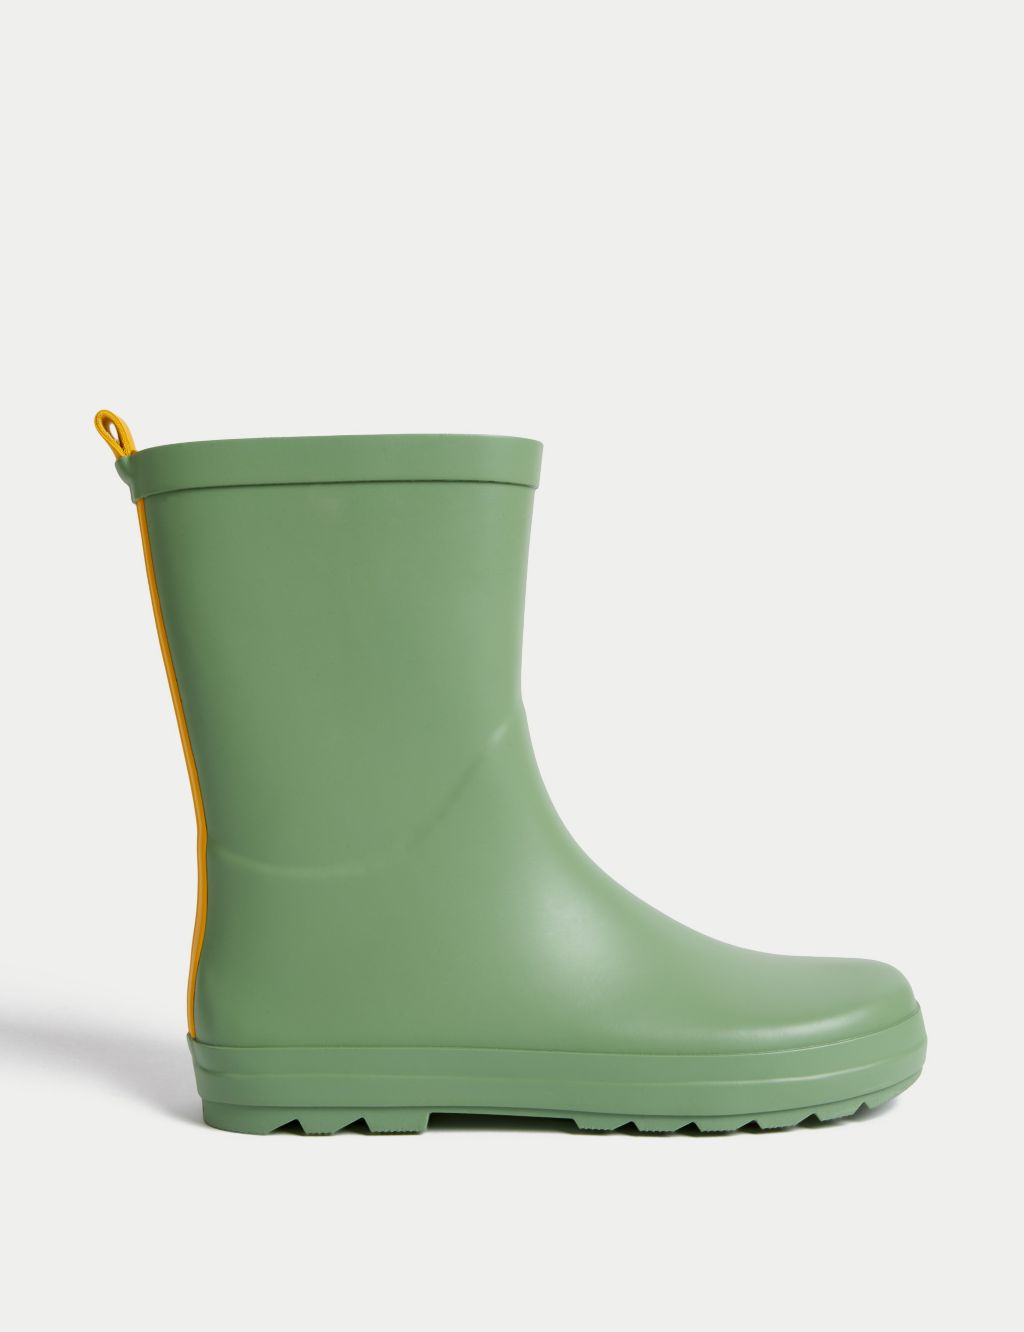 Kids' Wellies (4 Small - 7 Large) image 1